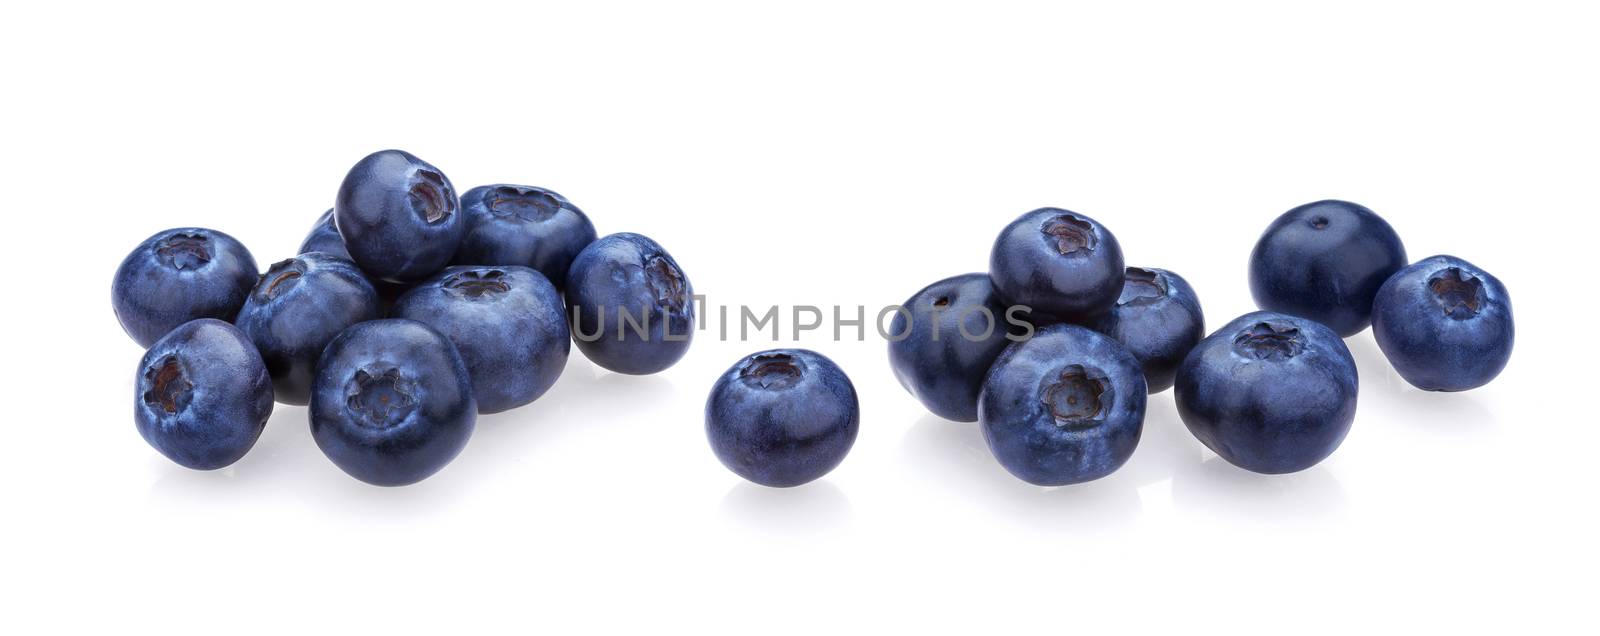 Blueberry isolated on white background. A pile of fresh blueberries, fresh wild berries, ideal for use in packaging, close-up